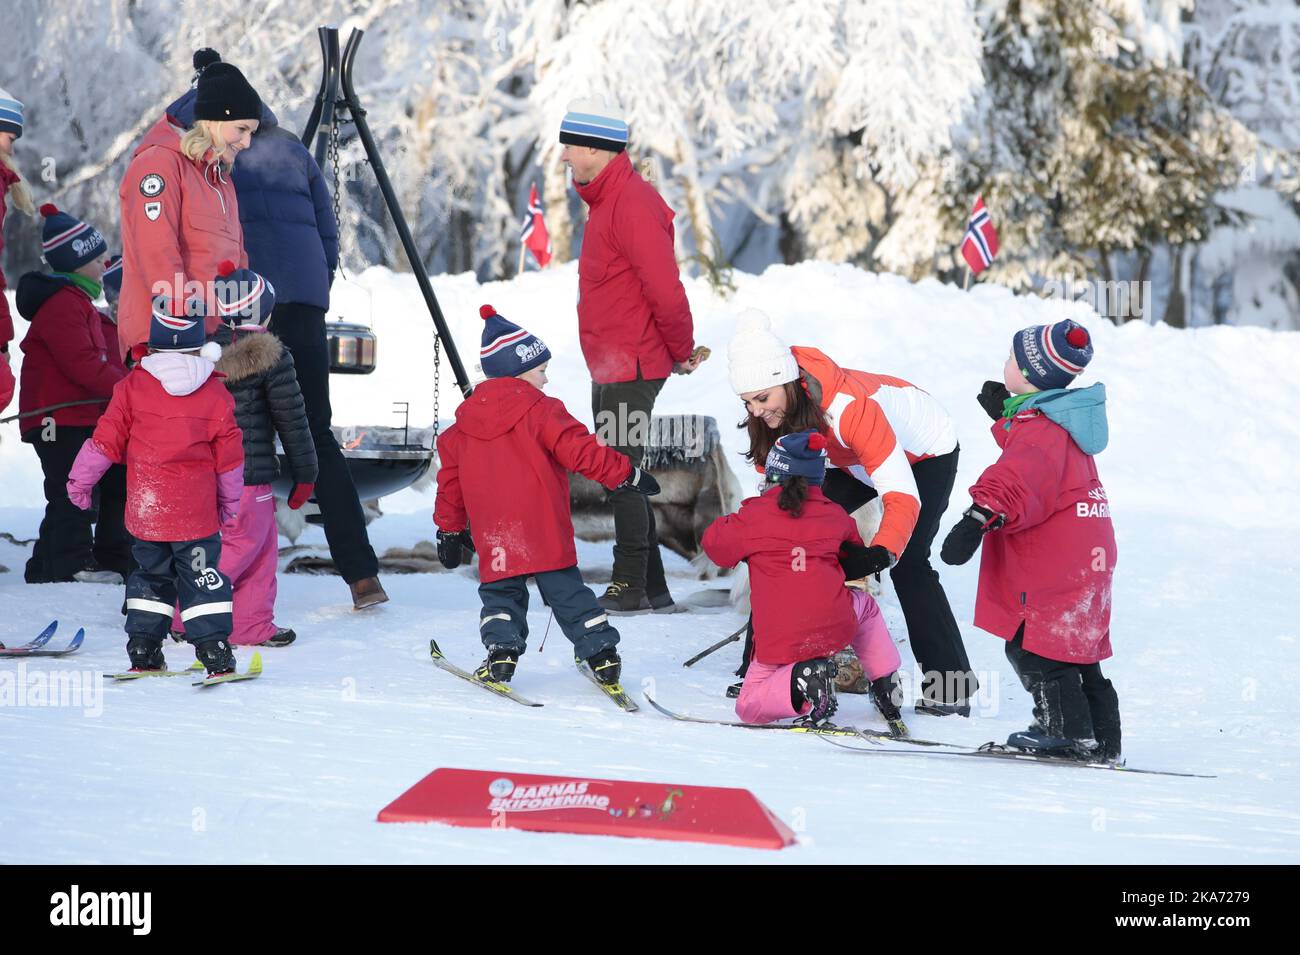 Oslo, Norway 20180202. Prince William of Great Britain and Duchess Kate visits Oevresetertjern at Tryvann in Oslo as the last point of the program on their official visit to Norway. Here they can see skiing activities at a ski school and visit the Tomm Mustad open-air nursery school. Duchess Kate helps a child on skies. Crown Princess Mette-Marit to the left.. Photo: Haakon Mosvold Larsen / NTB scanpi Stock Photo